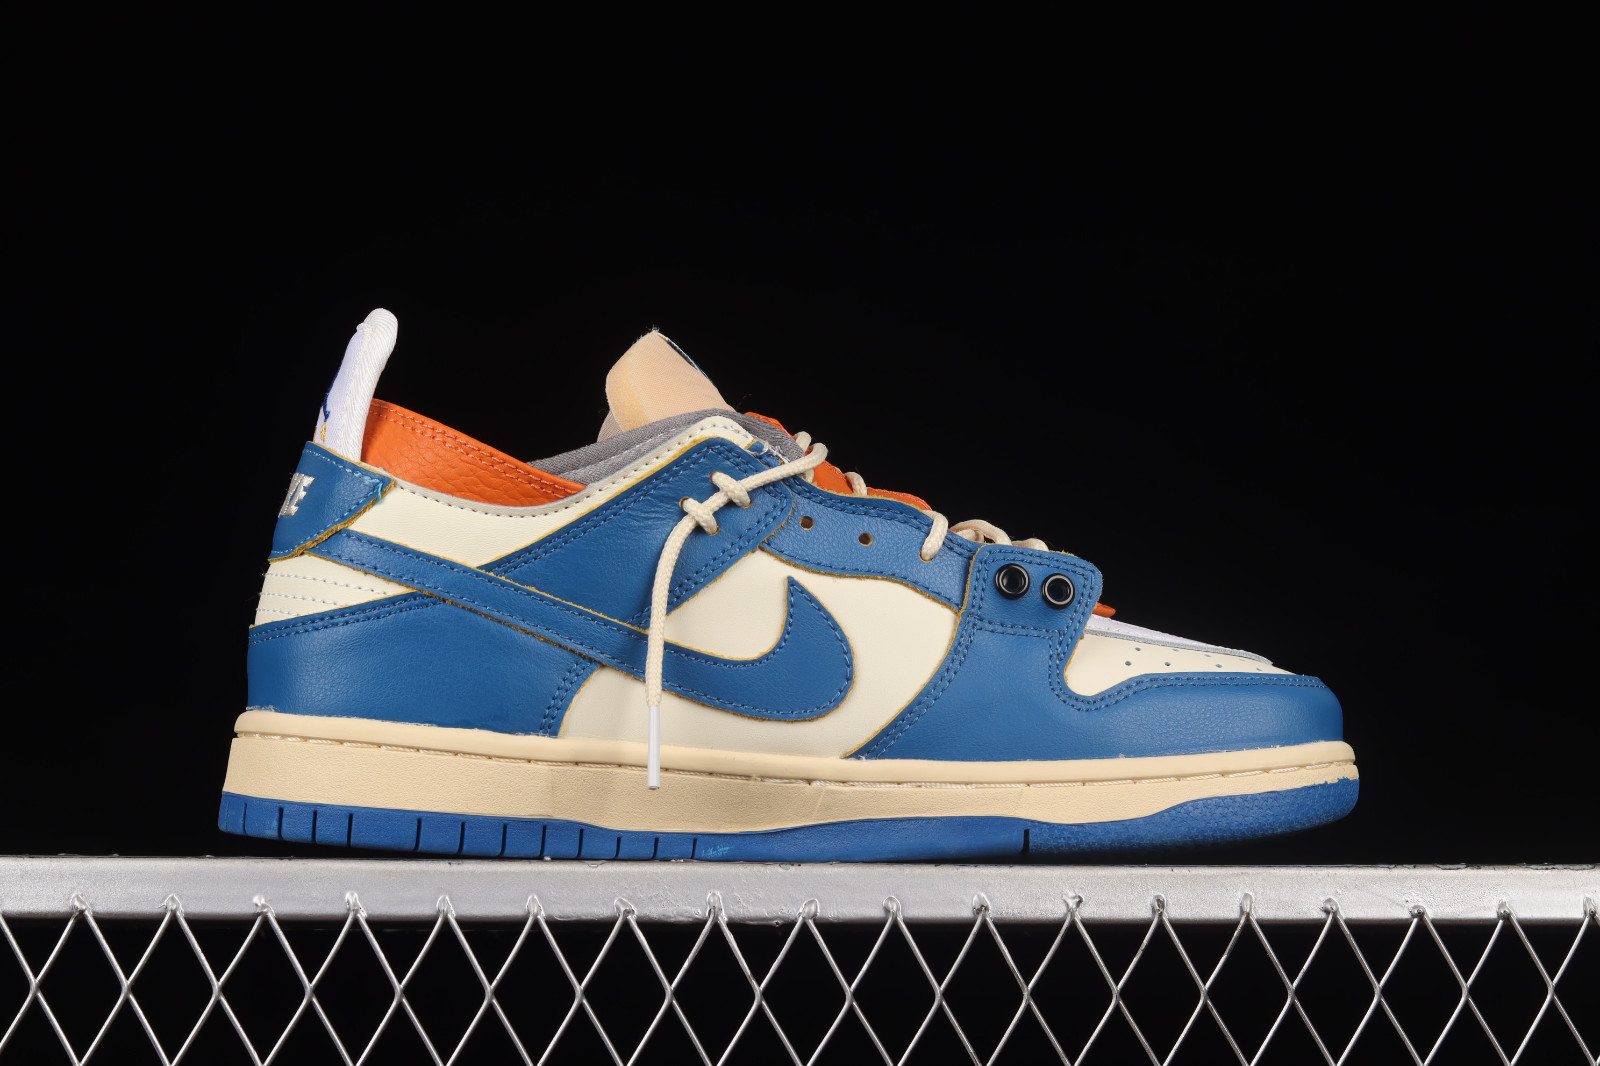 MultiscaleconsultingShops - Nike SB Dunk Low PRO Navy Blue Orange White - - legit cheap nike this to buy free shipping store